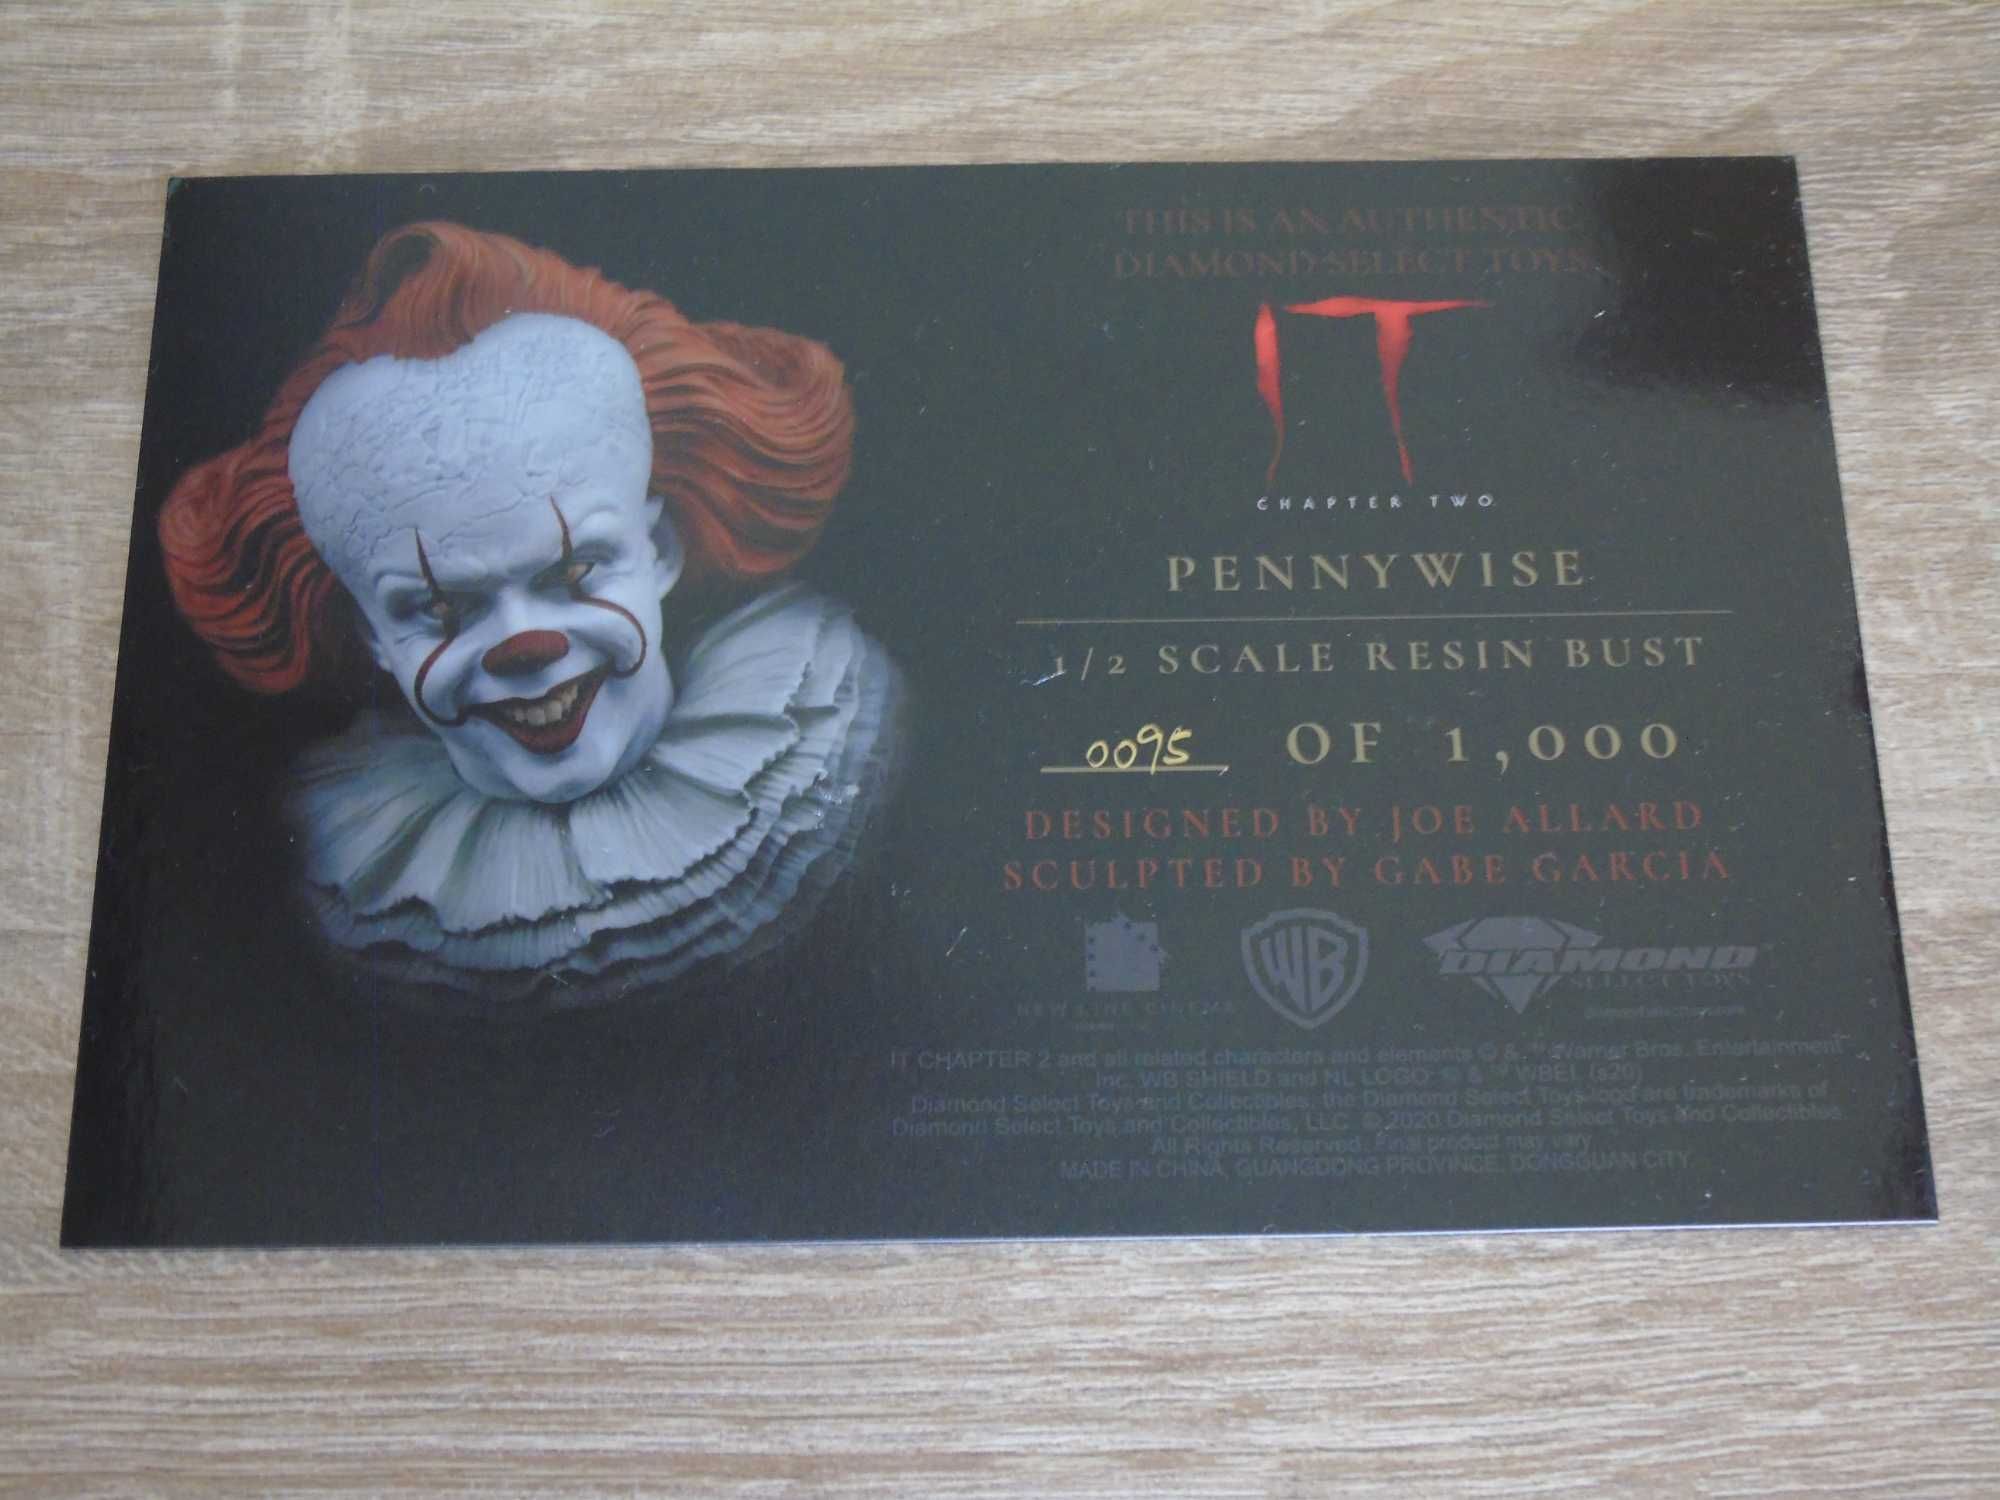 Bust 1/2 IT Pennywise Diamond Select Collect Limitat Horror/Sideshow